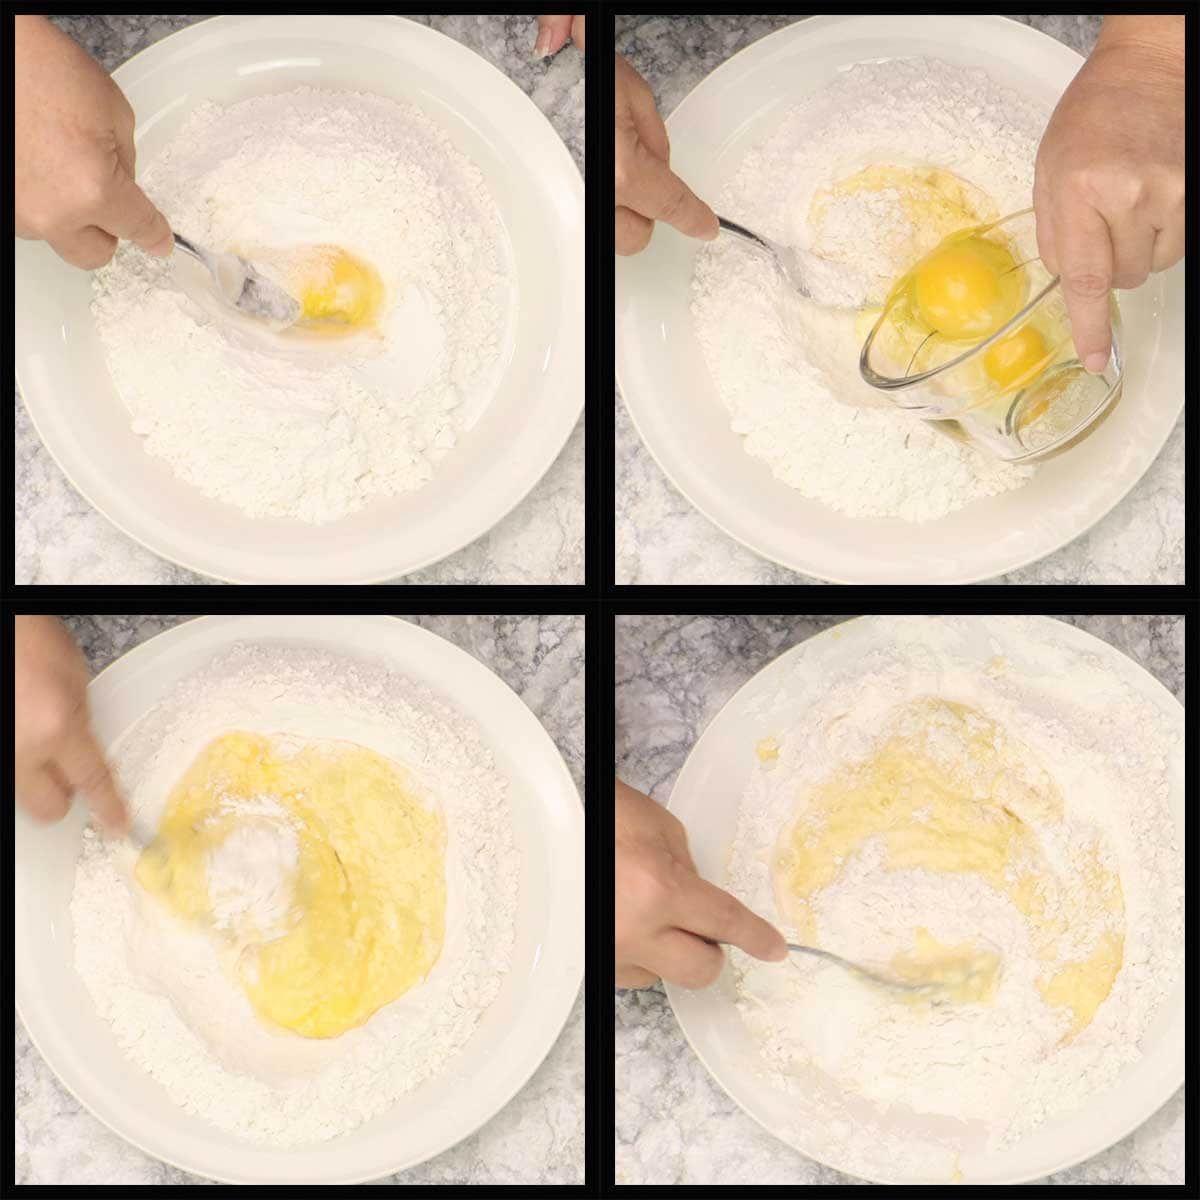 mixing the flour with the eggs, salt, water.